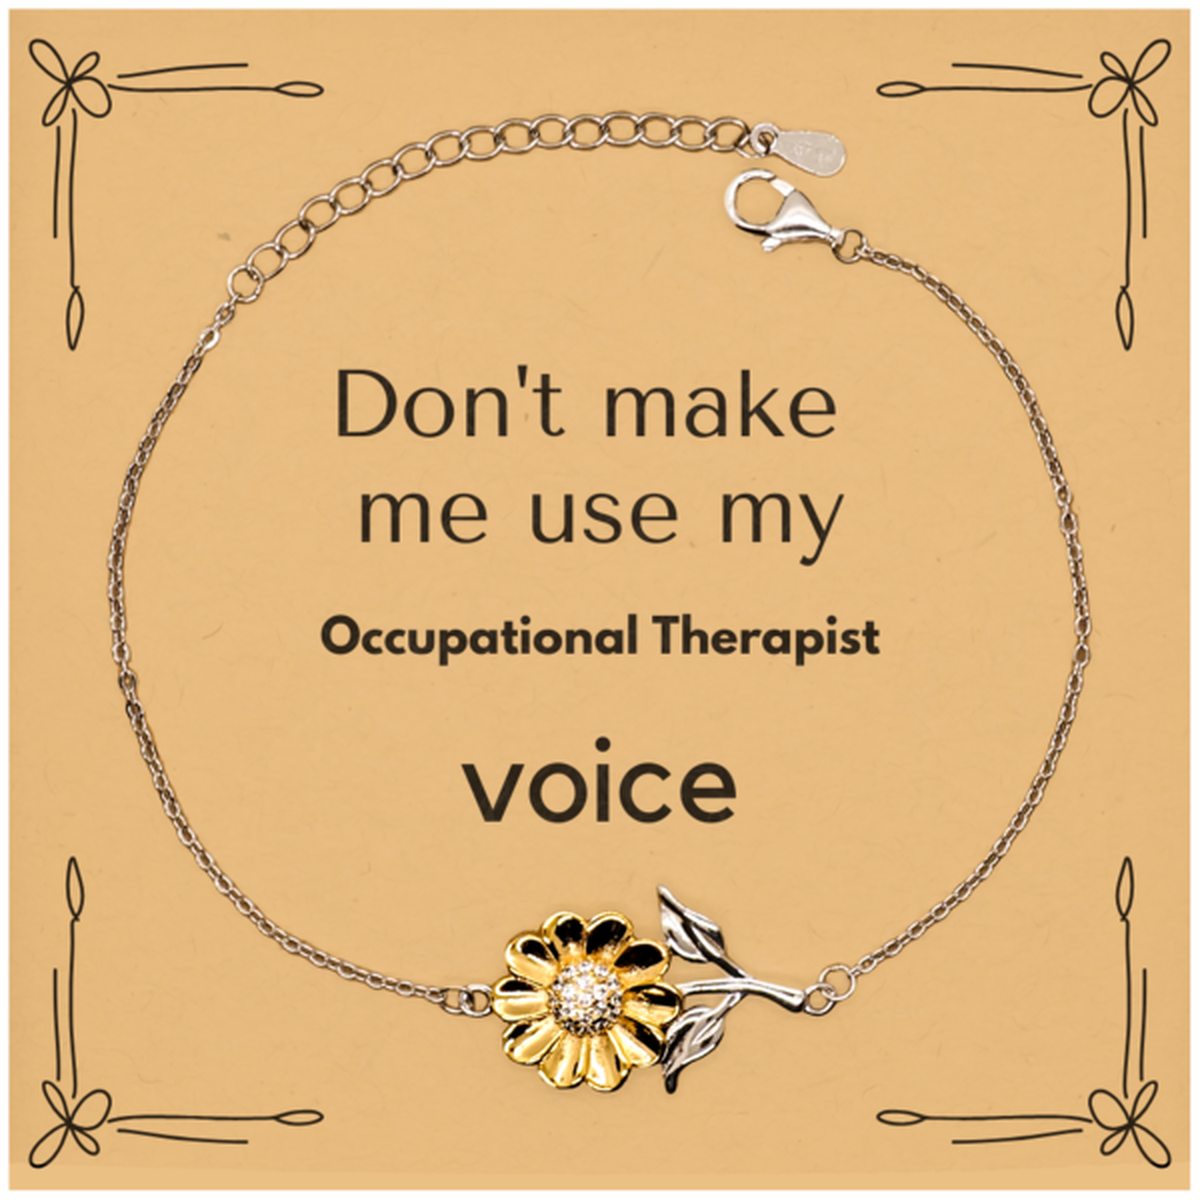 Don't make me use my Occupational Therapist voice, Sarcasm Occupational Therapist Card Gifts, Christmas Occupational Therapist Sunflower Bracelet Birthday Unique Gifts For Occupational Therapist Coworkers, Men, Women, Colleague, Friends